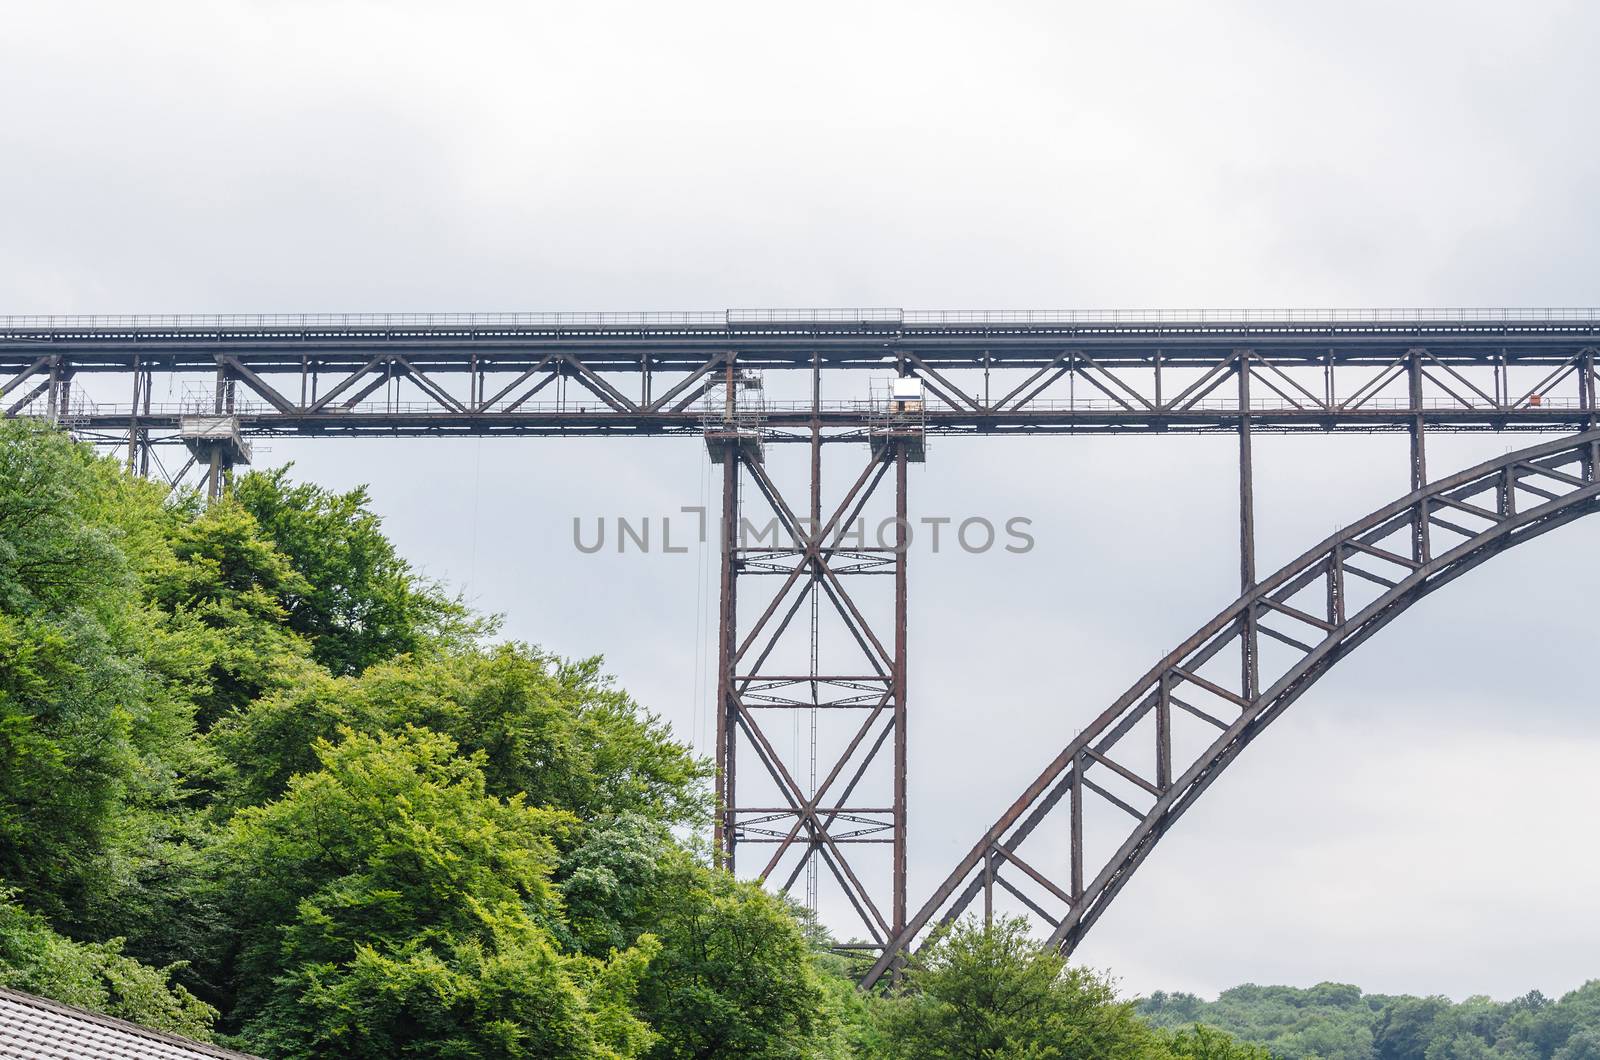 The Müngstener bridge is the highest railway bridge in Germany. Until 1918 it was called Kaiser Wilhelm Bridge.
Year of construction in 1894 and has a height of 107 m and a total length of 465 m.
